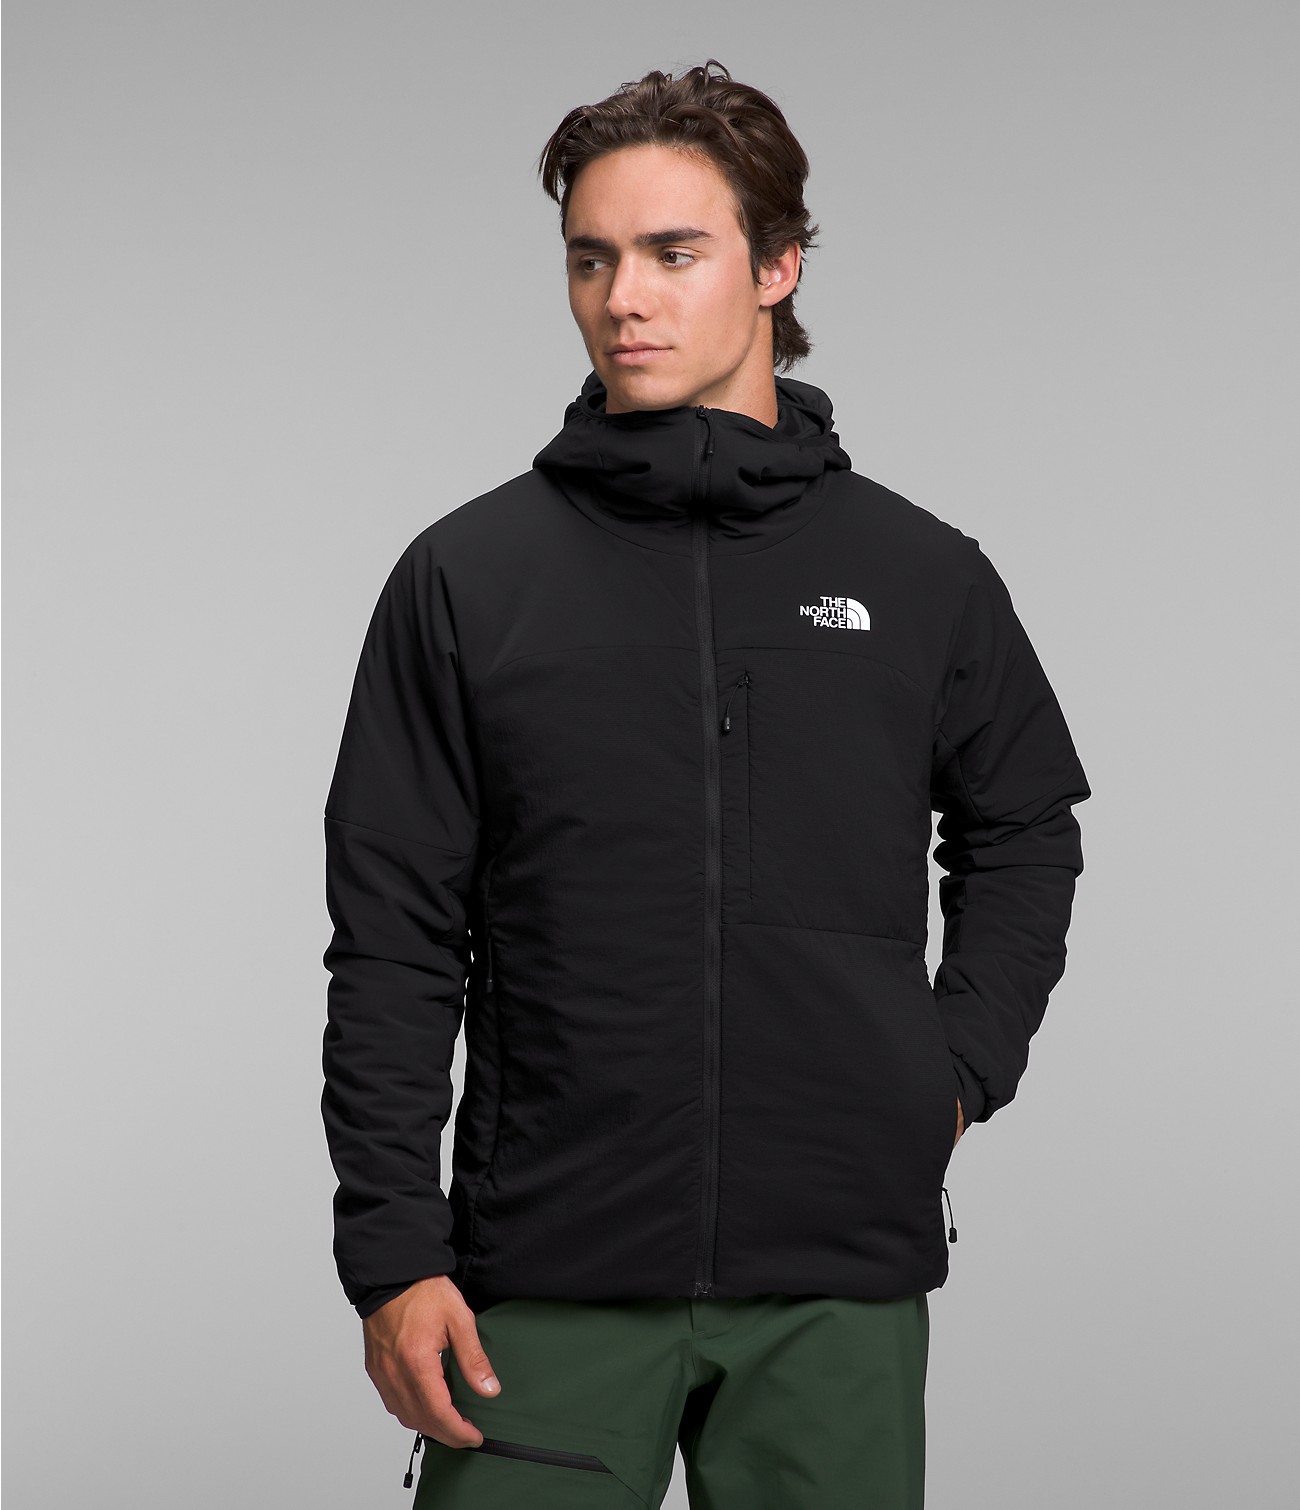 Unlock Wilderness' choice in the Outdoor Research Vs North Face comparison, the Summit Series Casaval Hoodie by The North Face